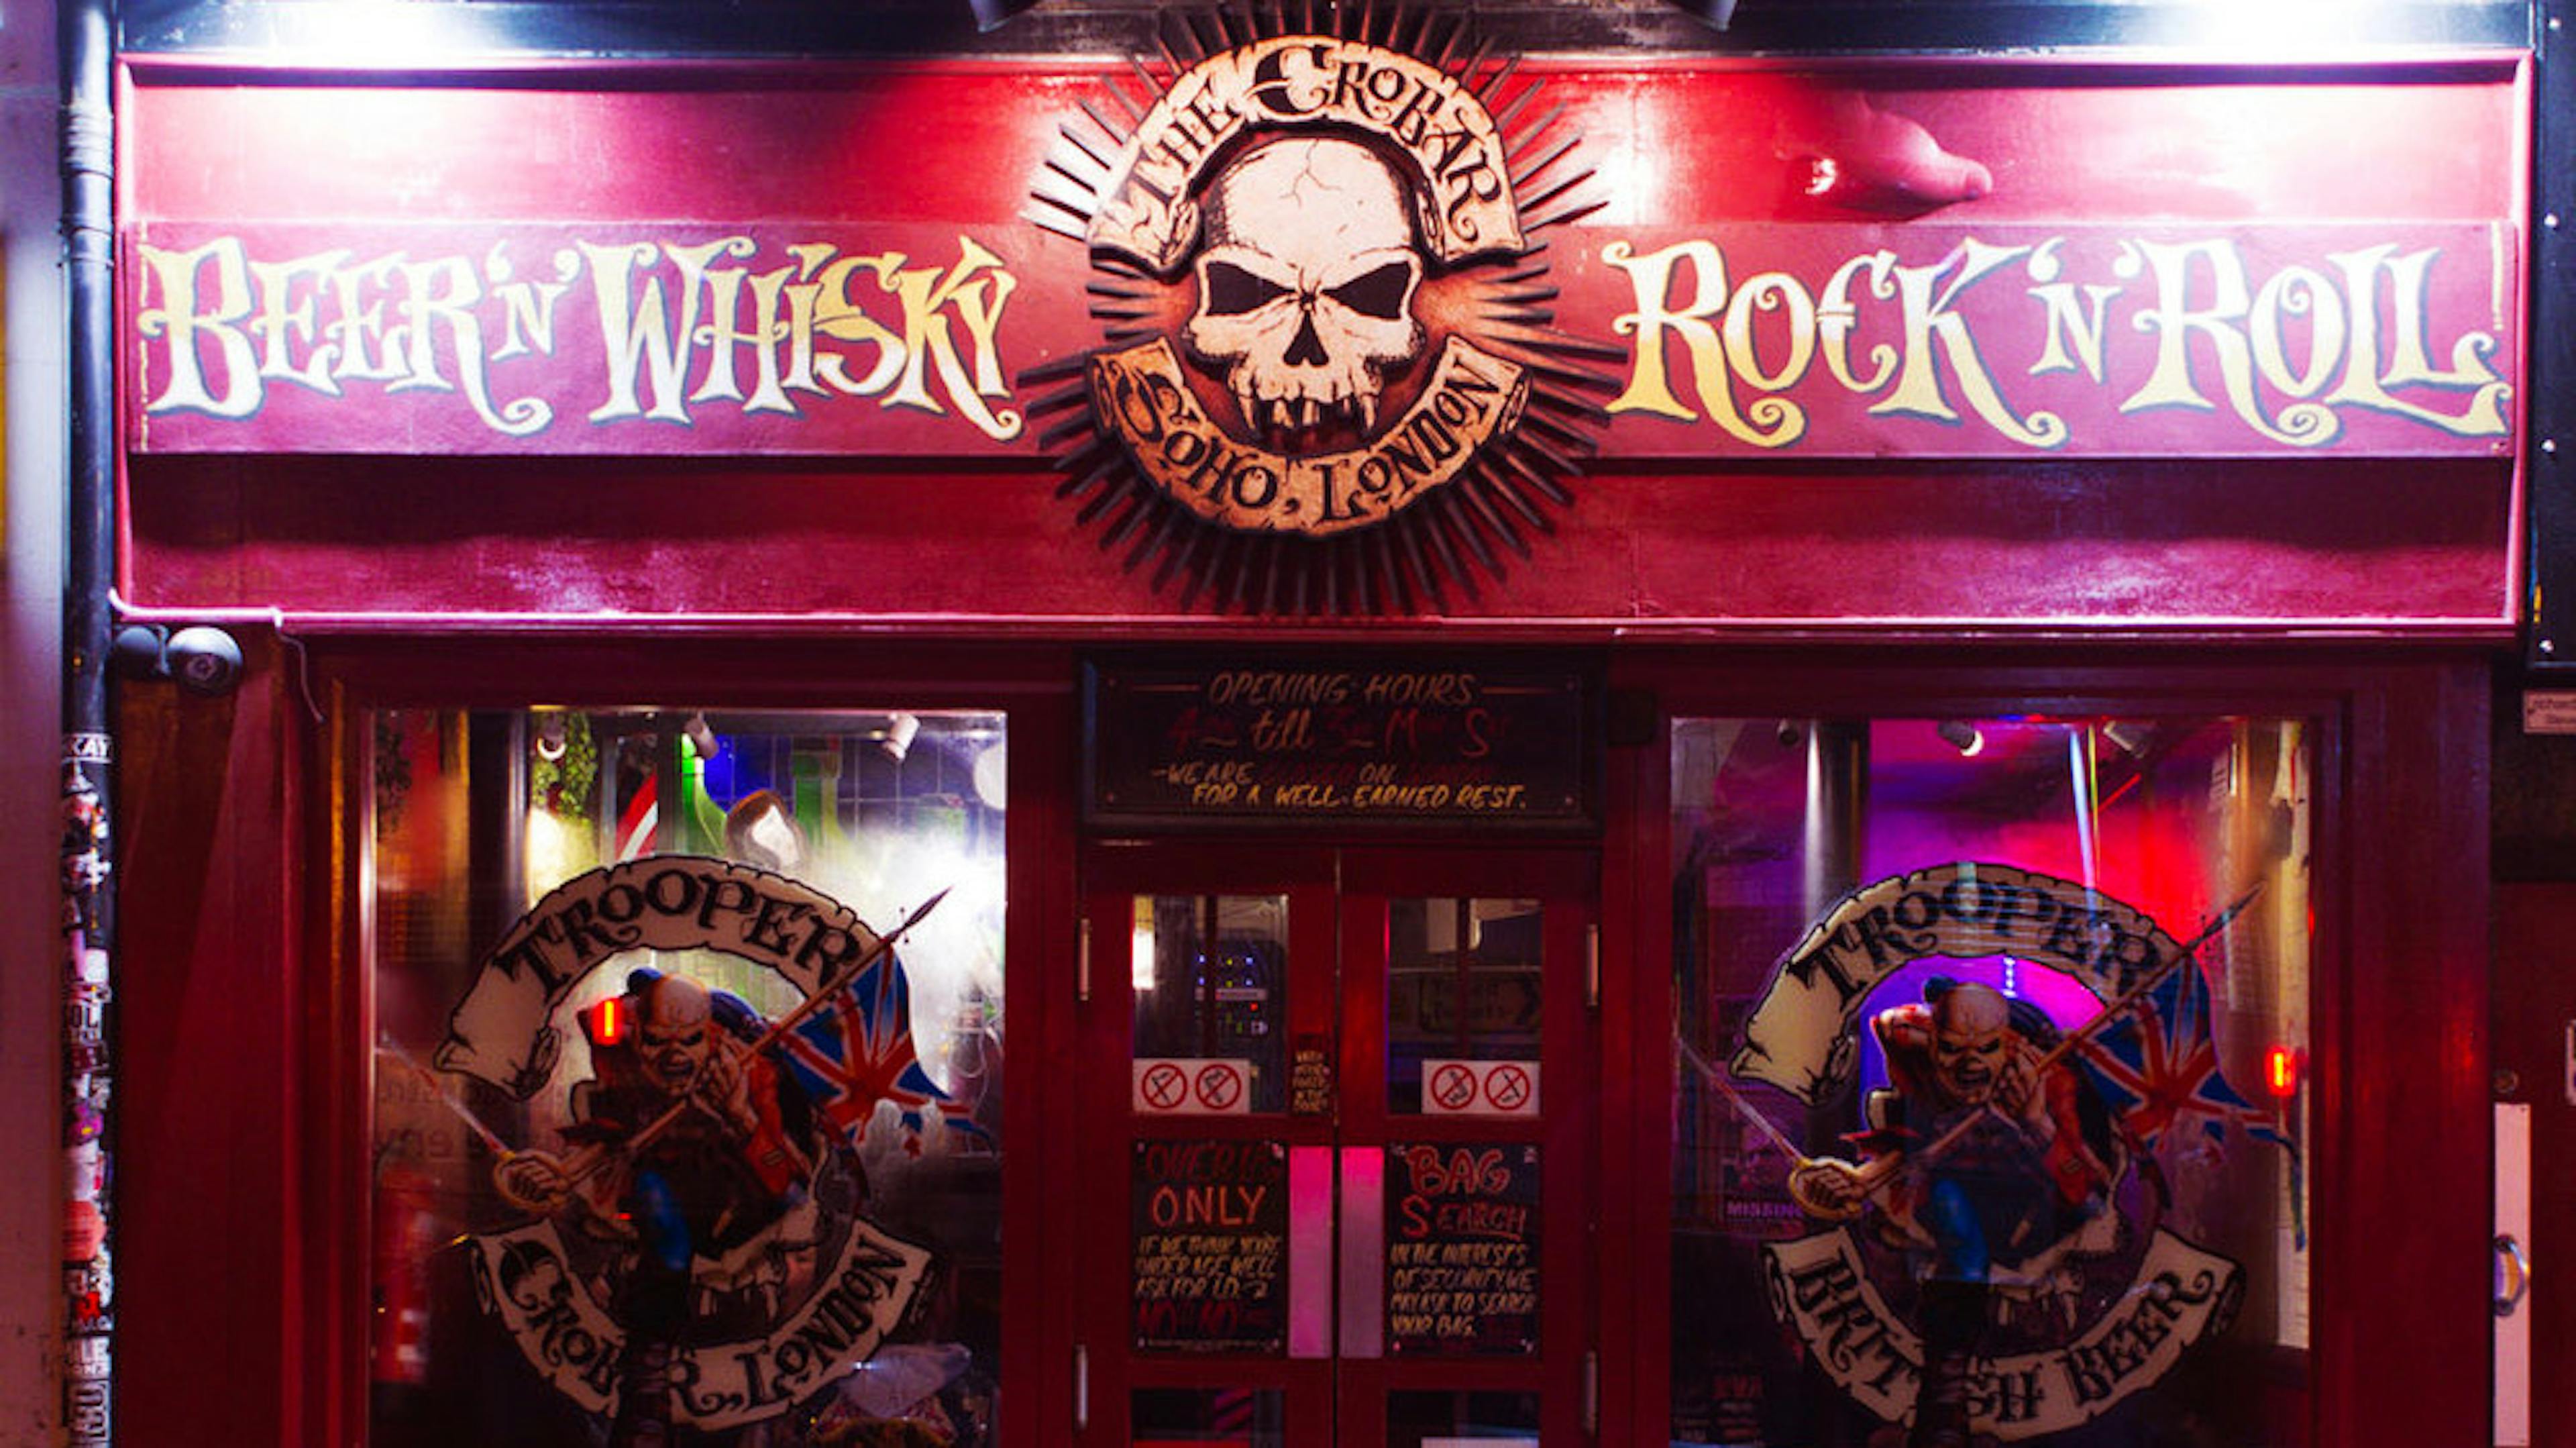 Farewell to Crobar: The beer-soaked jewel of London's metal community